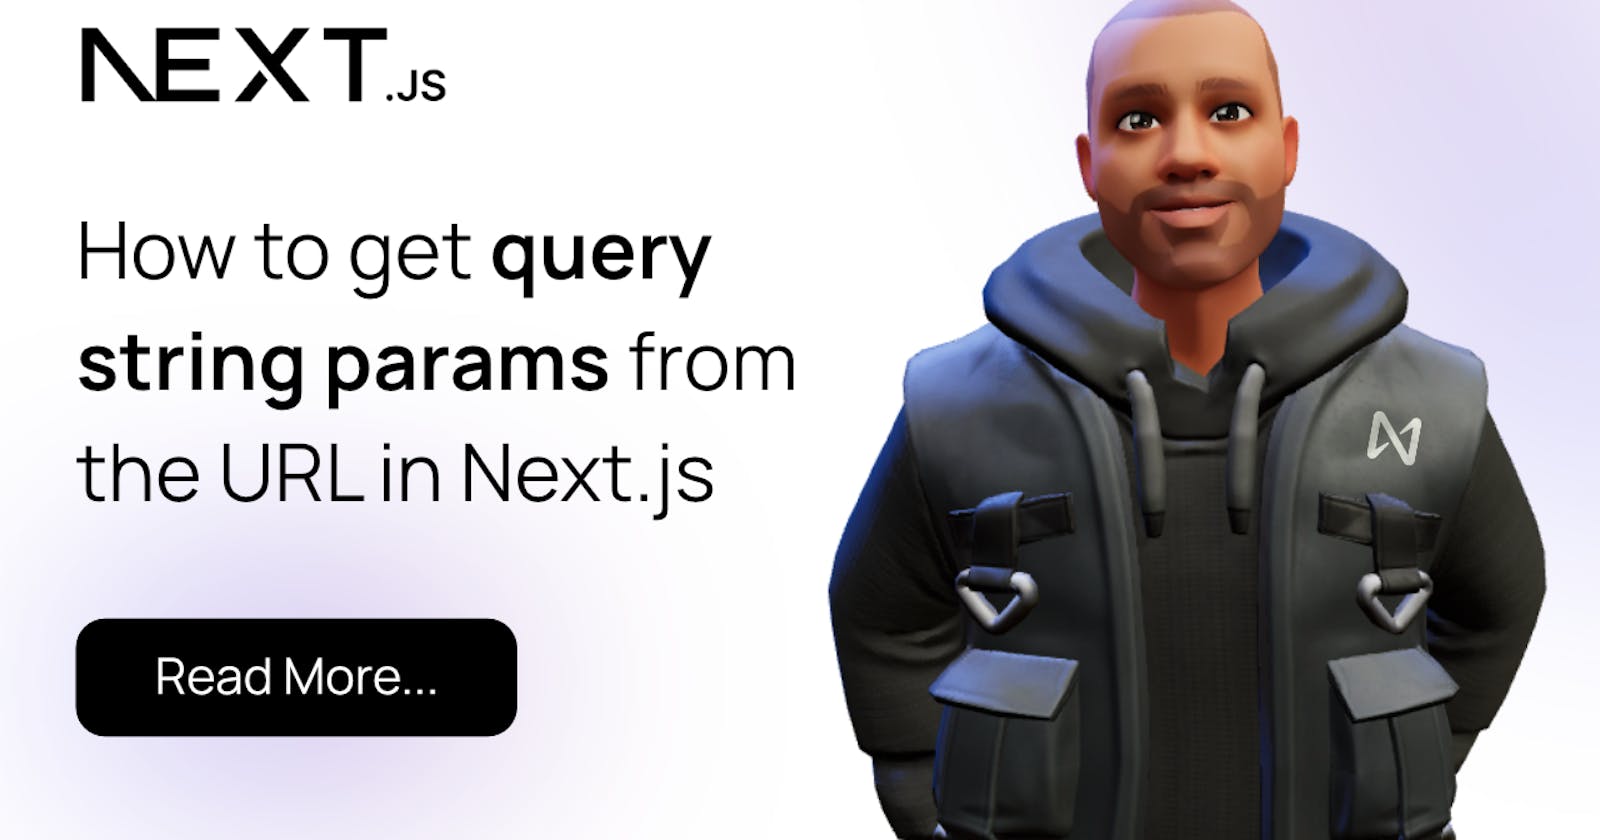 How to get query string parameters from the URL in Next.js